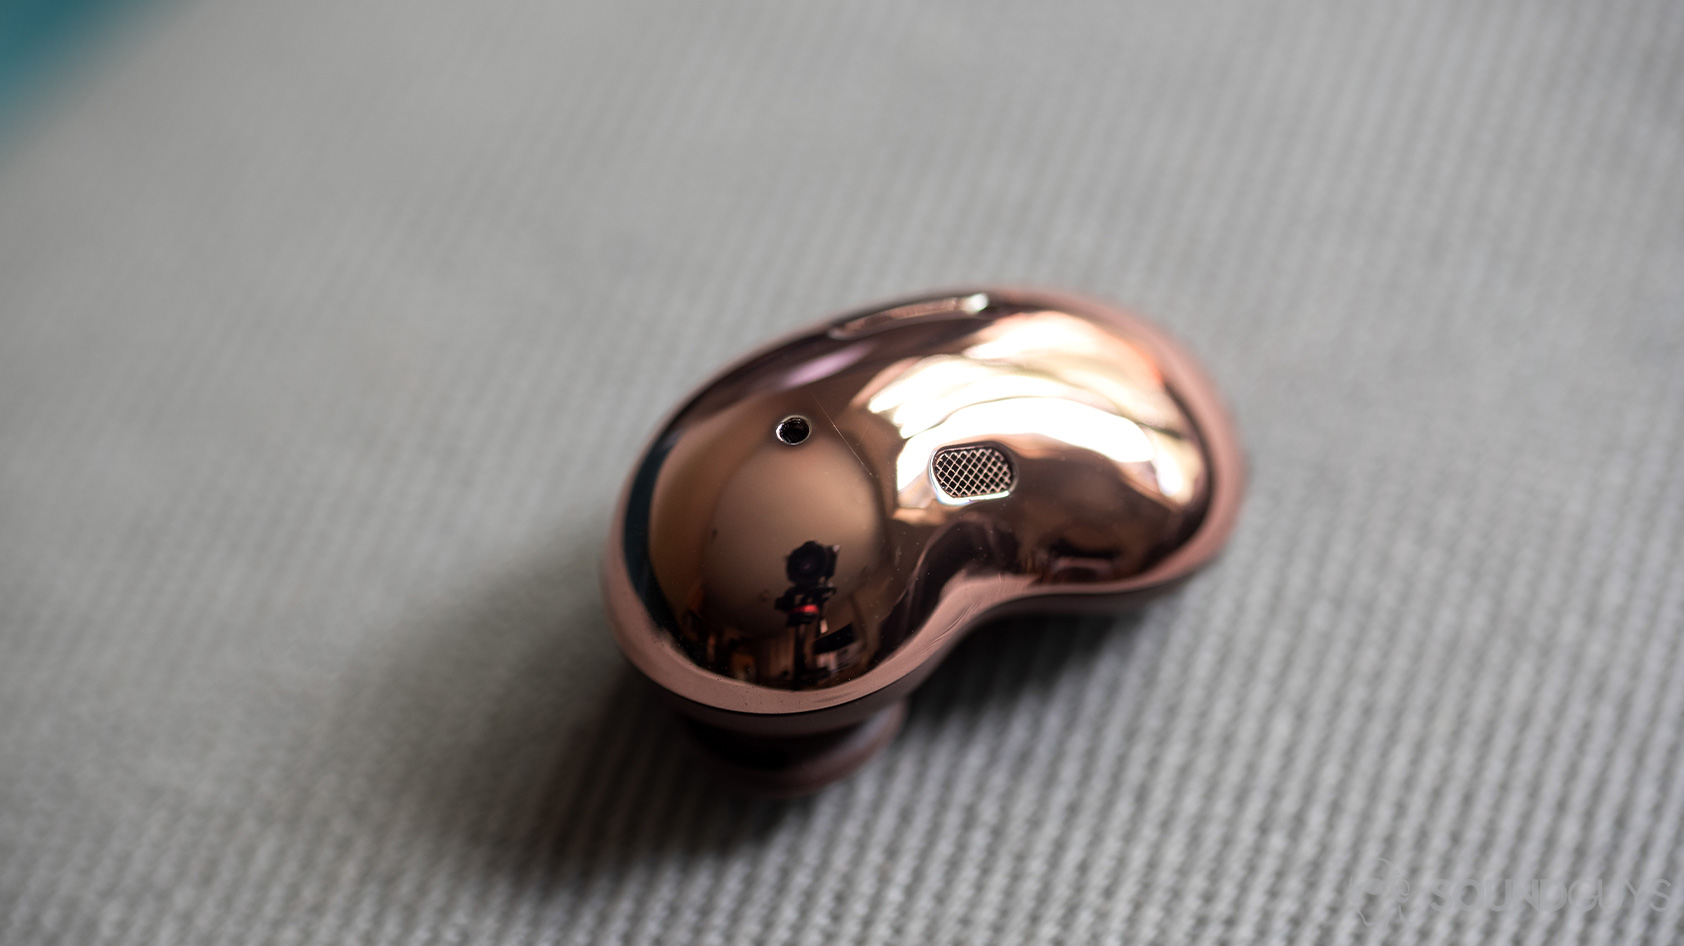 A picture of the Samsung Galaxy Buds Live noise canceling true wireless earbuds bean shaped, reflective exterior; the earbud is at angle for the Samsung Galaxy Buds Plus vs Samsung Galaxy Buds Live comparison.